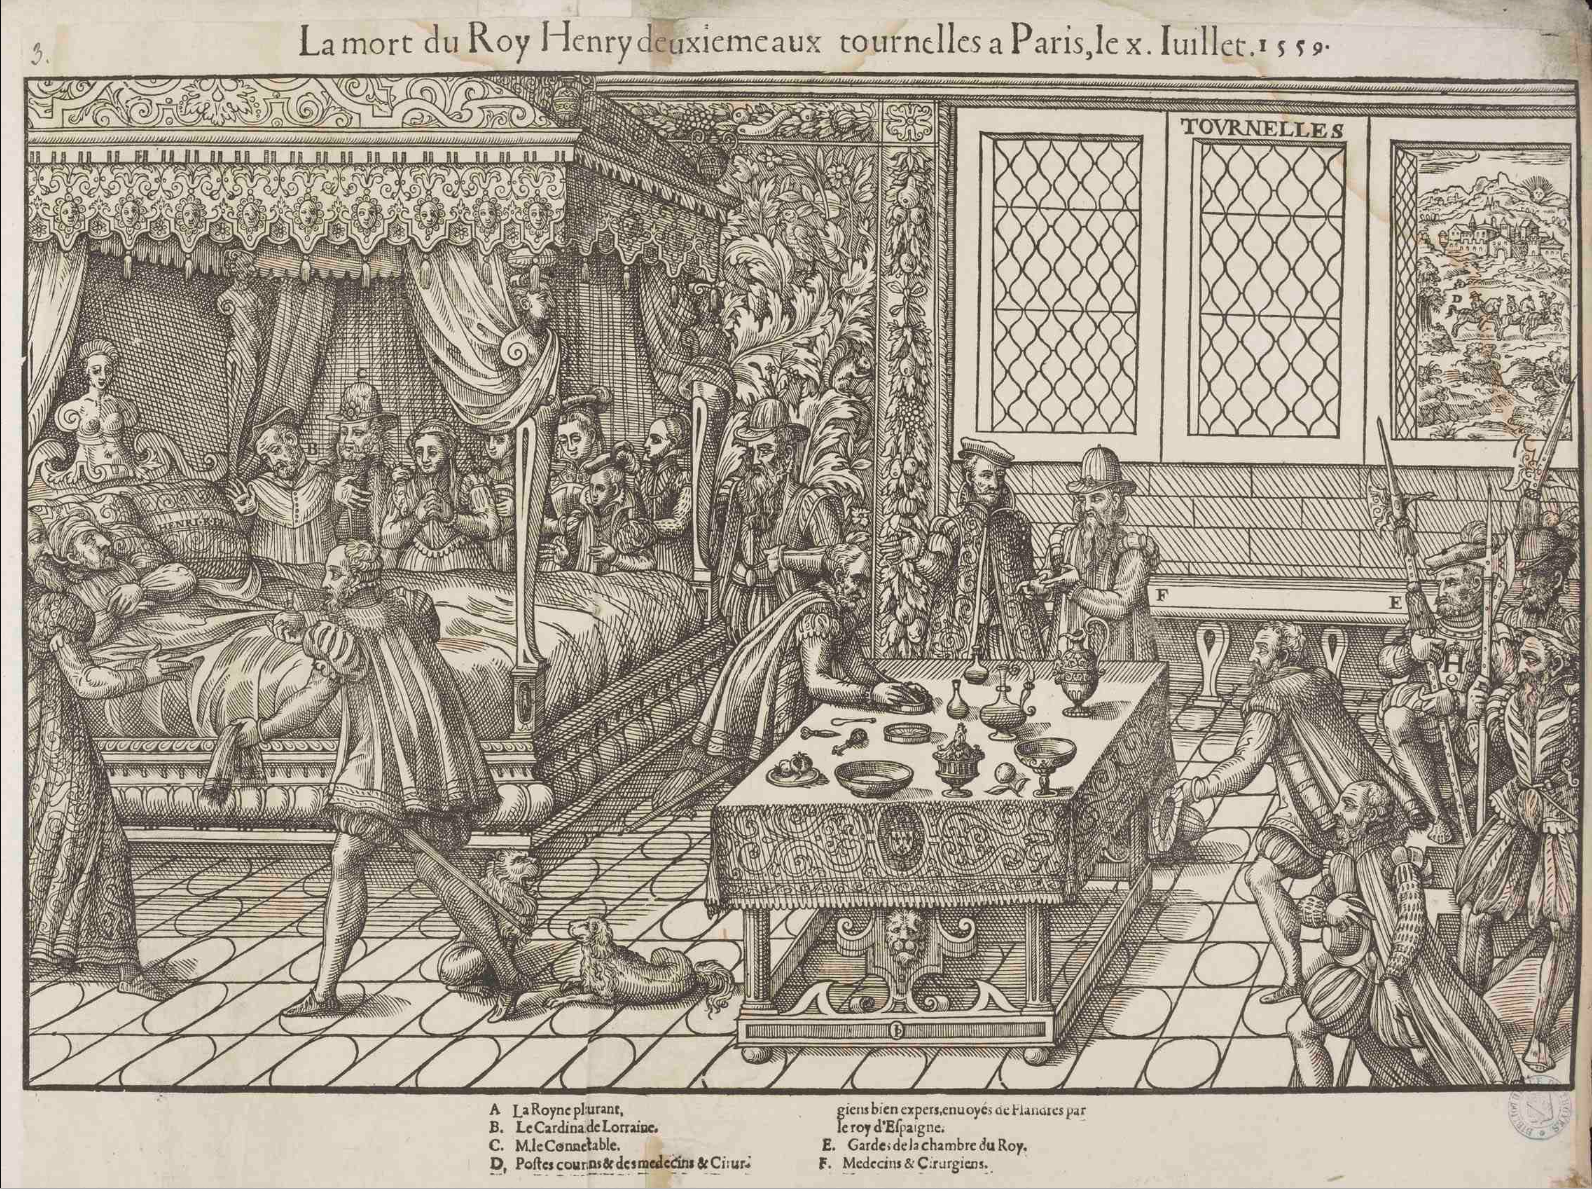 Death of Henry II in Paris, 1559. In a tournament Henry received a fata; blow to his eye from a lance, but he did not die immediately. The woodcut shows him on his deathbed with his family. In the center of the room we see his physicians, Ambroise Paré and Andreas Vesalius. As famous as these physicians were, they could do little except preside over the king